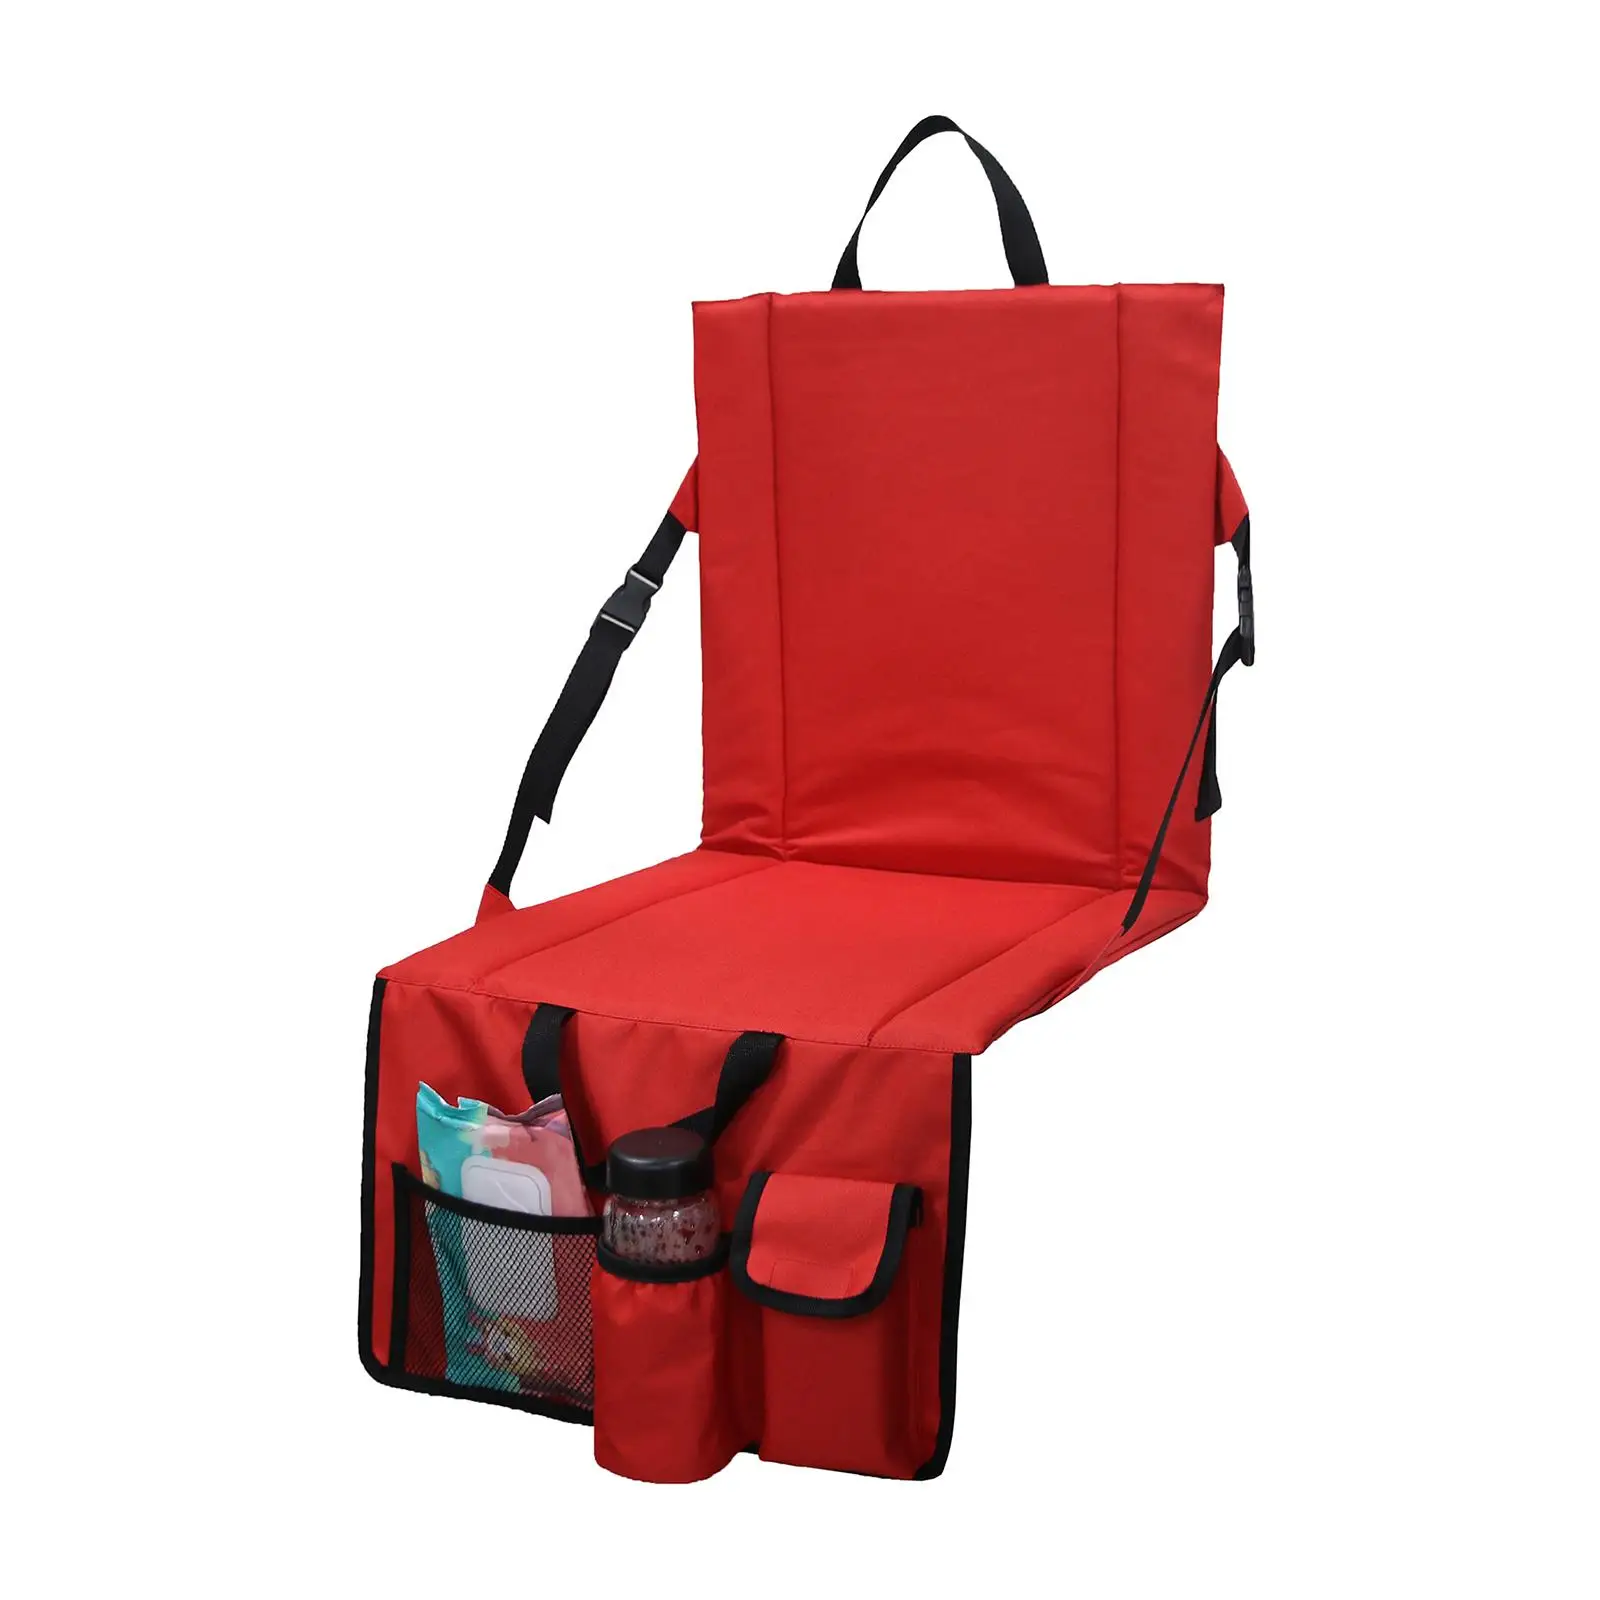 Portable Stadium Chair with Pocket Padded Holder Lightweight Sit Mat Wide Camping Backpacking Picnic Travel